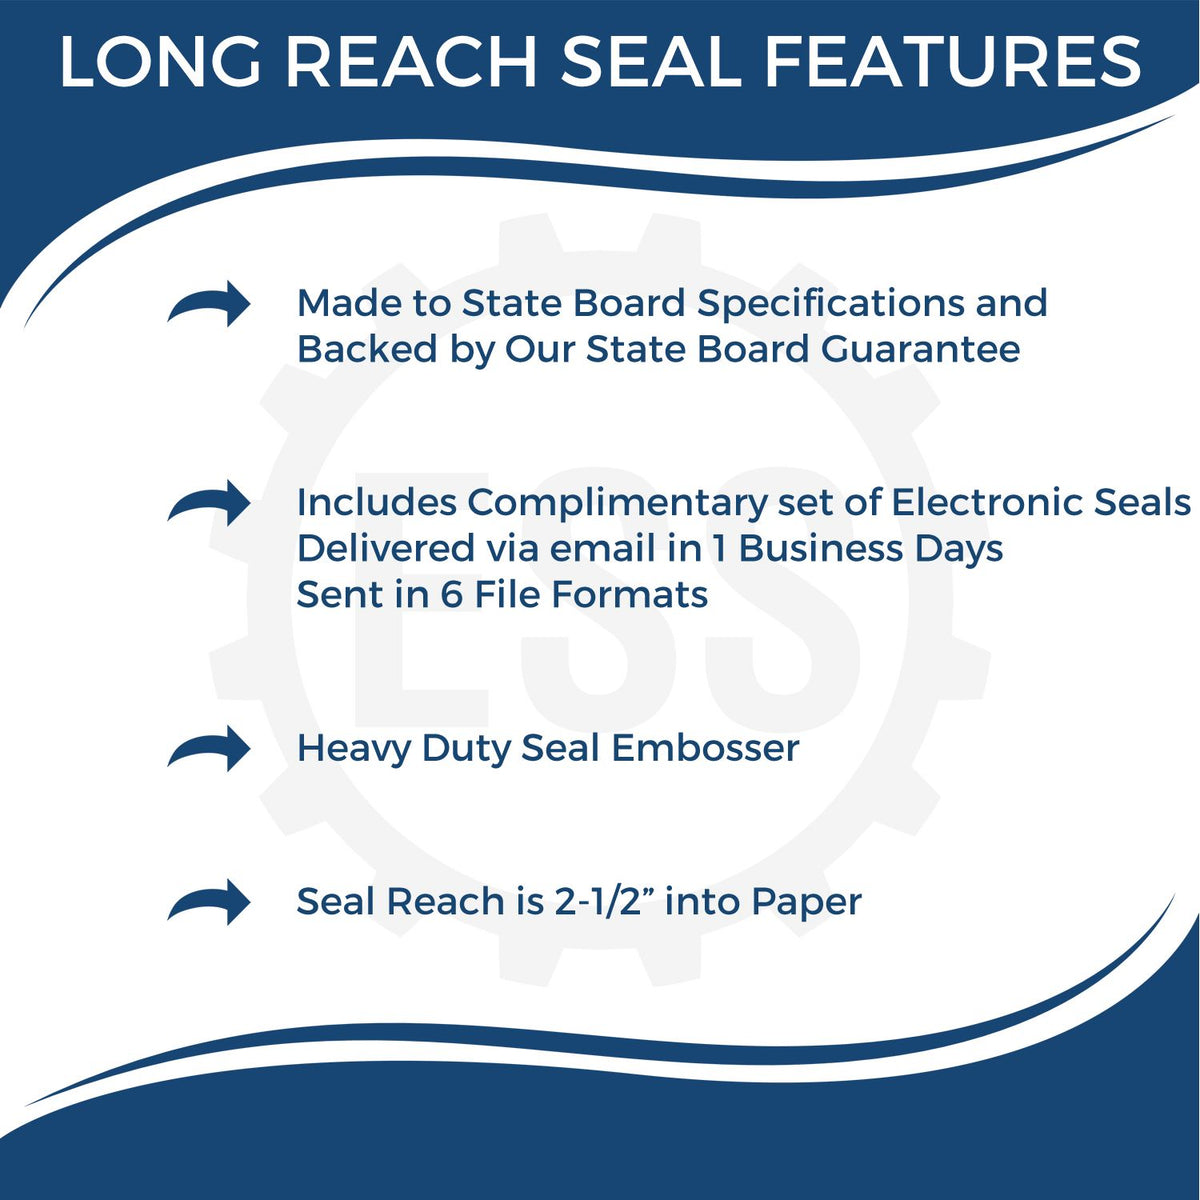 A picture of an infographic highlighting the selling points for the Long Reach Nebraska PE Seal